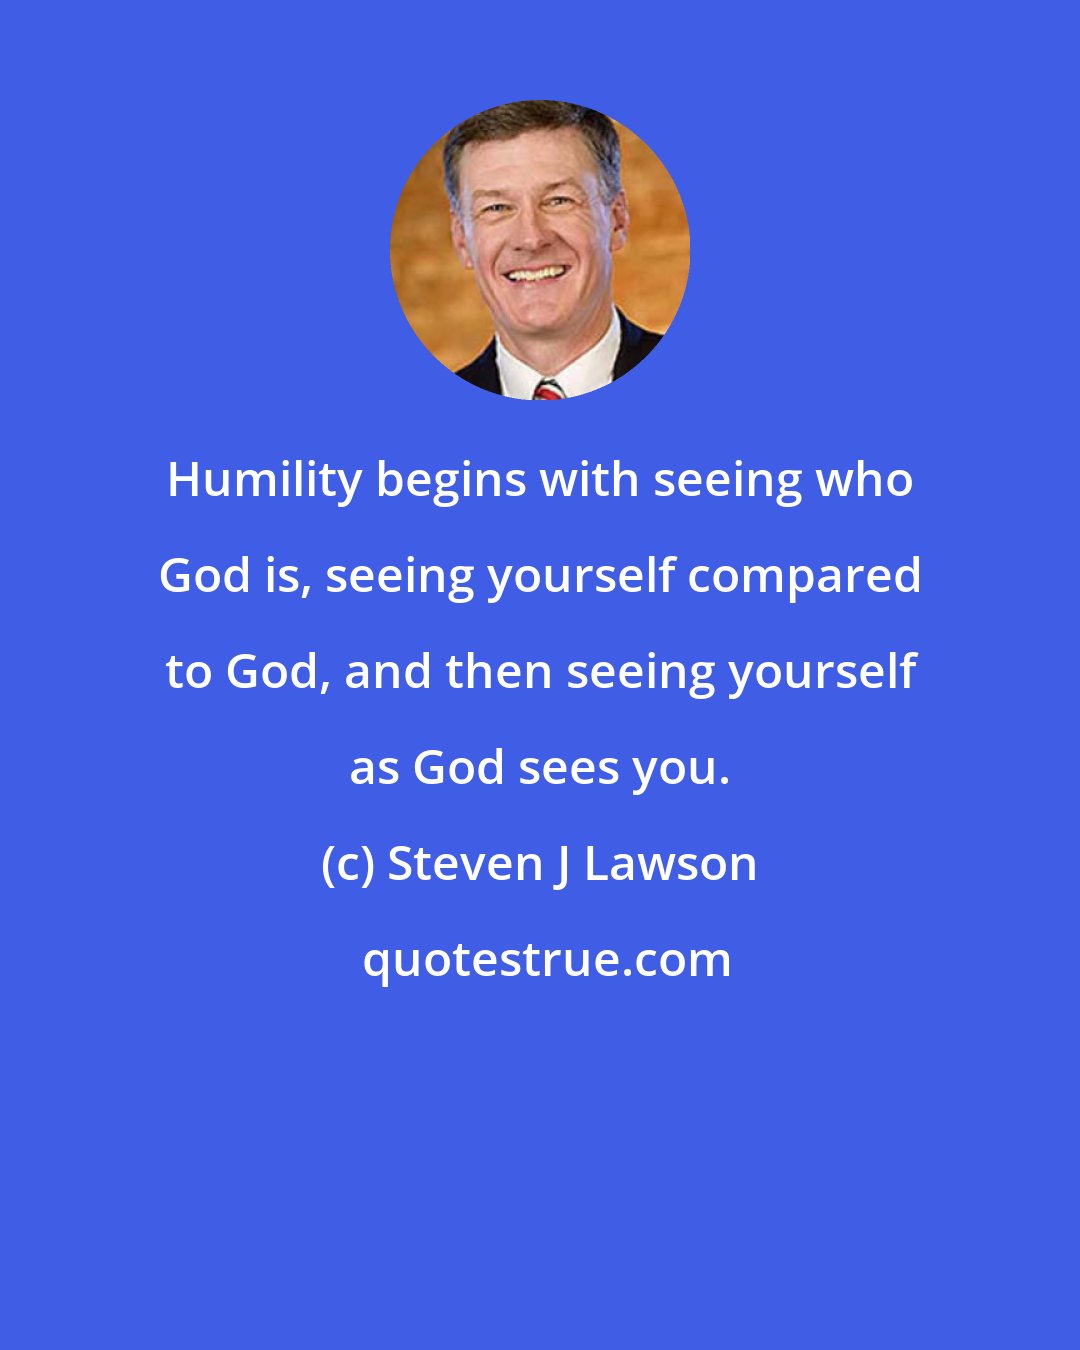 Steven J Lawson: Humility begins with seeing who God is, seeing yourself compared to God, and then seeing yourself as God sees you.